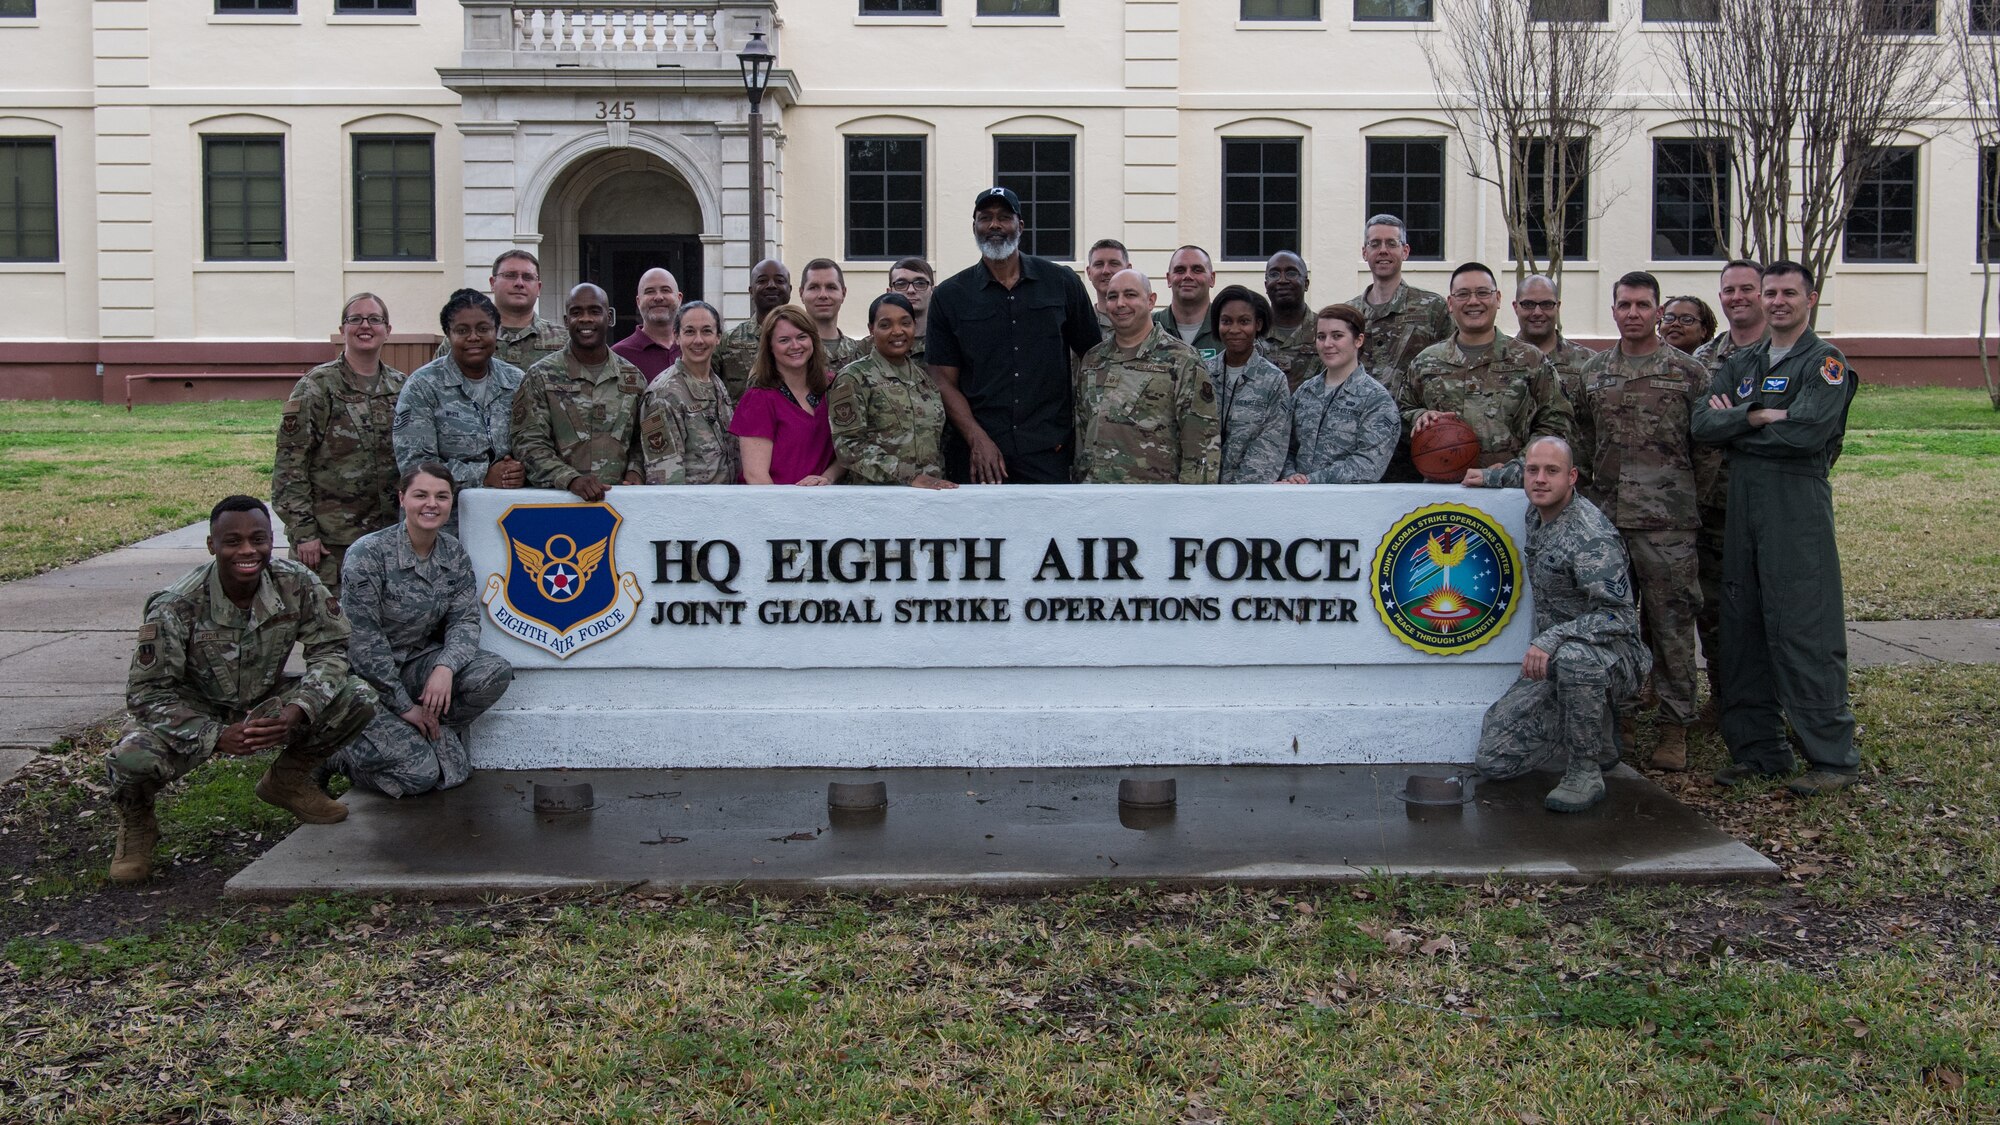 Karl “the Mailman” Malone and members from “The Mighty Eighth” Air Force and Joint-Global Strike Operations Center stand outside the headquarters building following a Leadership Lab, Feb. 4, 2020. Malone received a firsthand look at global bomber and NC3 operations during a visit to the numbered air force, which is located at Barksdale AFB, La. Malone is also a local area resident.